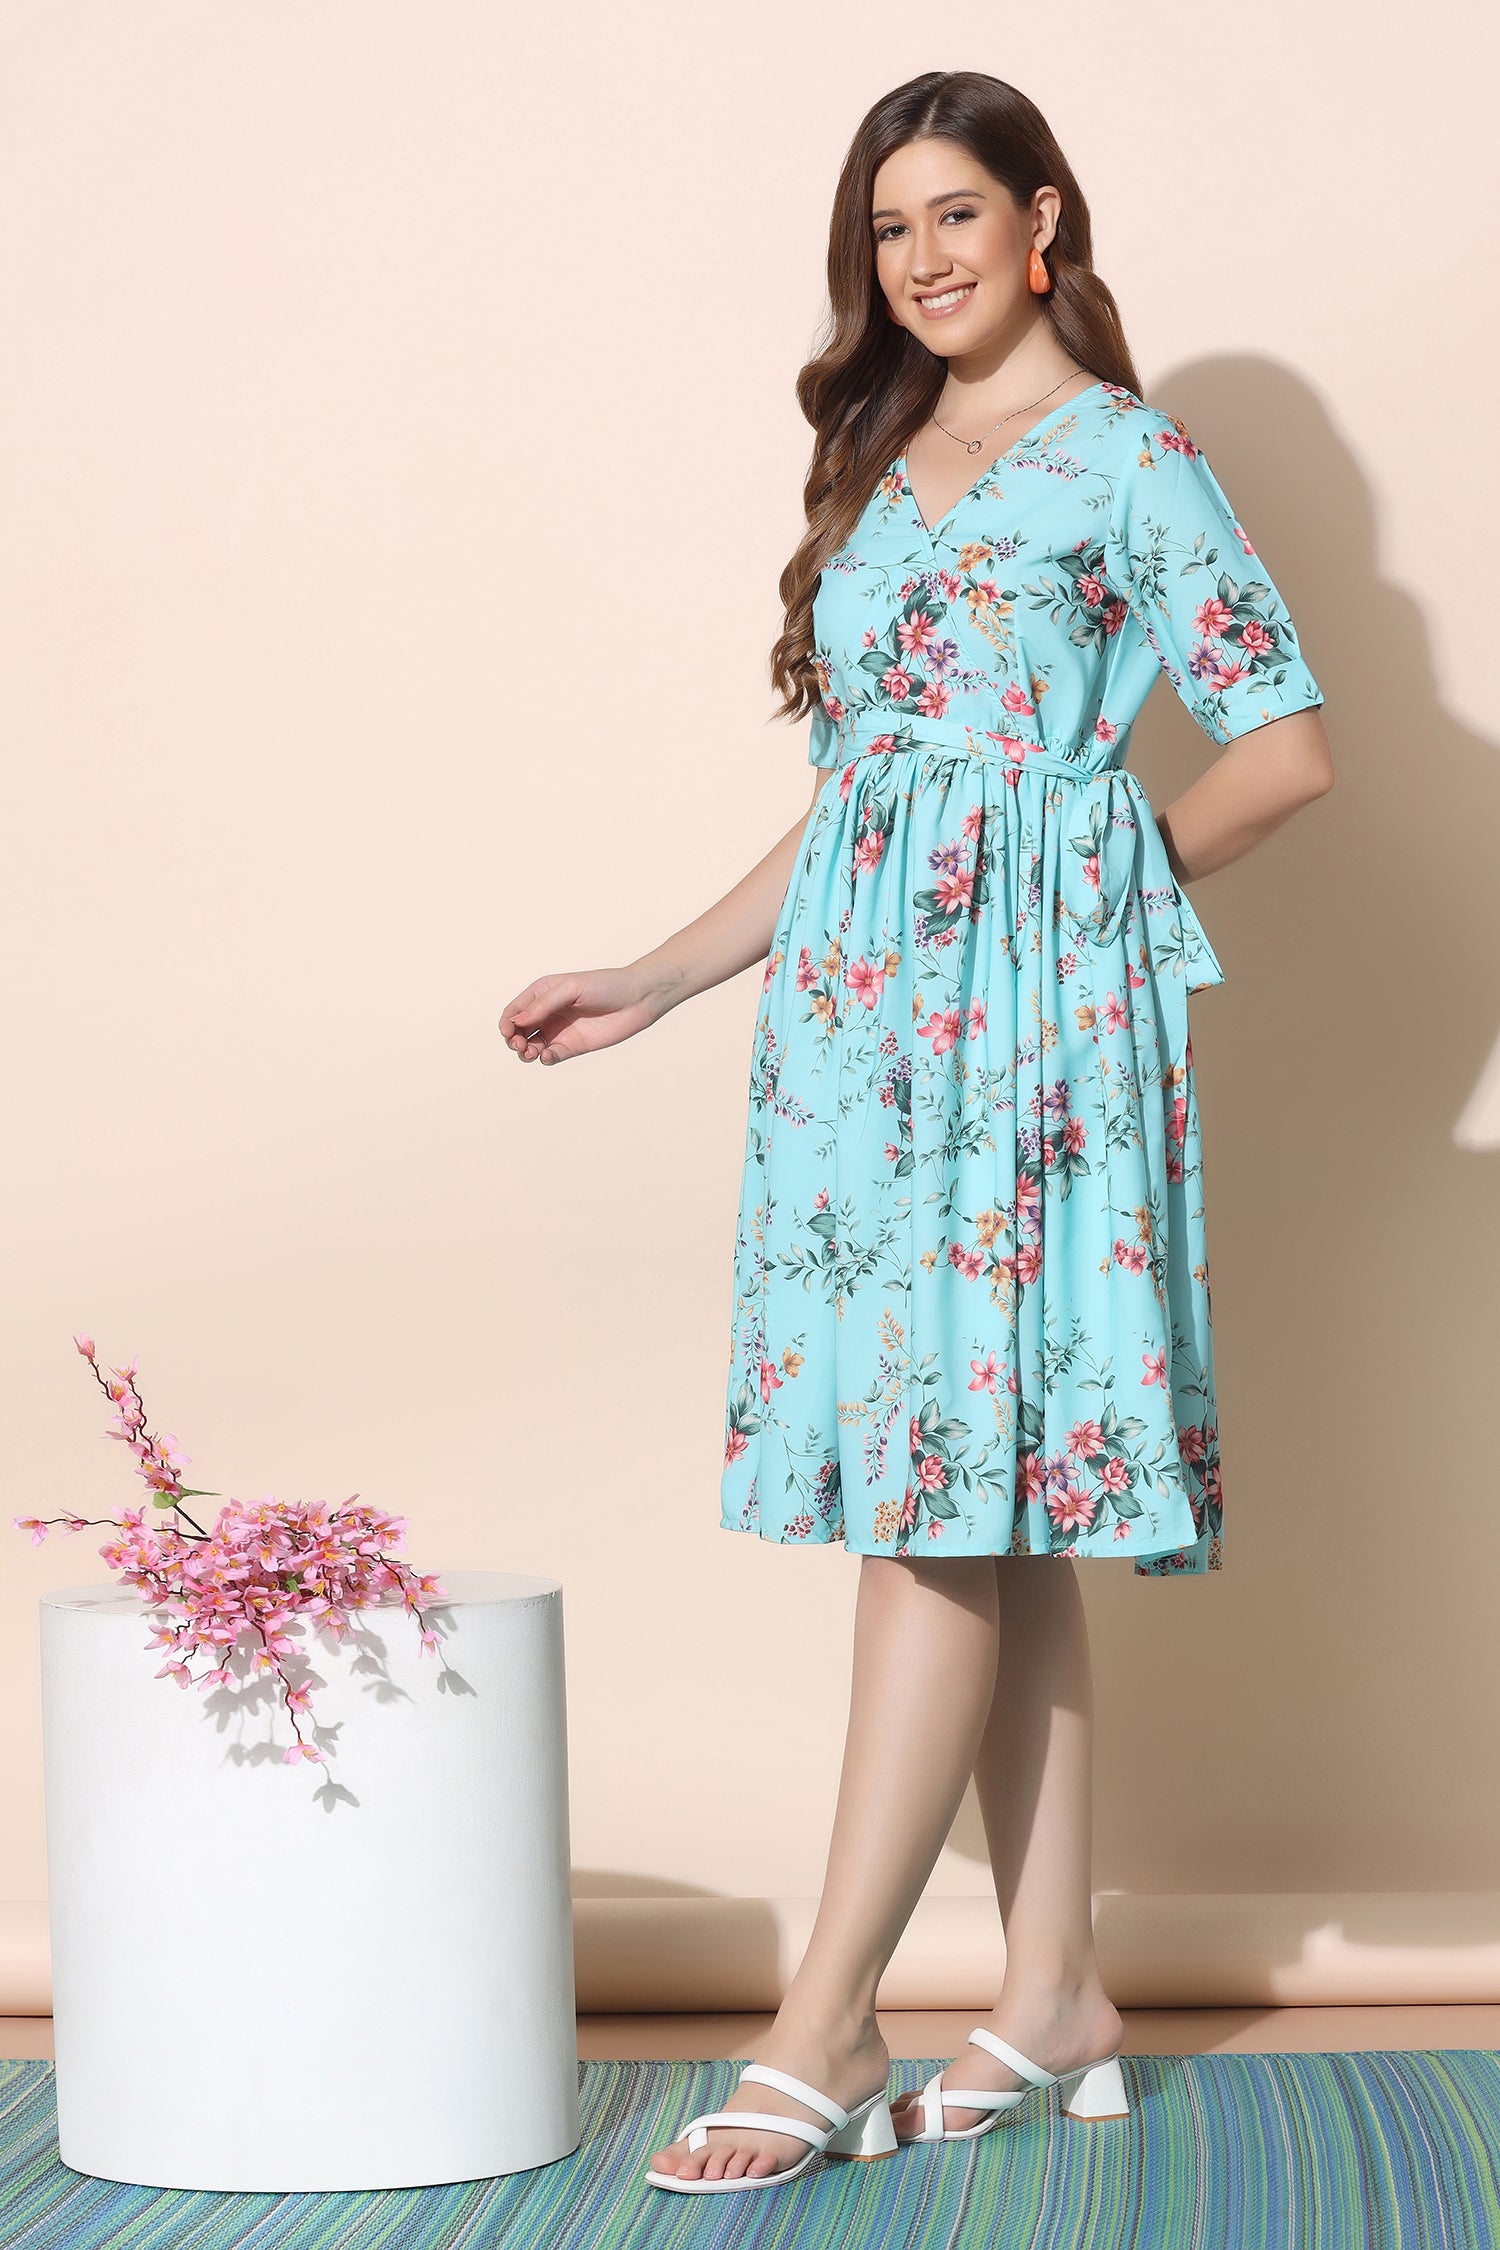 Pink Floral Printed Flared Tiered Knee Length Dress | ADFY-IHACD-053 |  Cilory.com